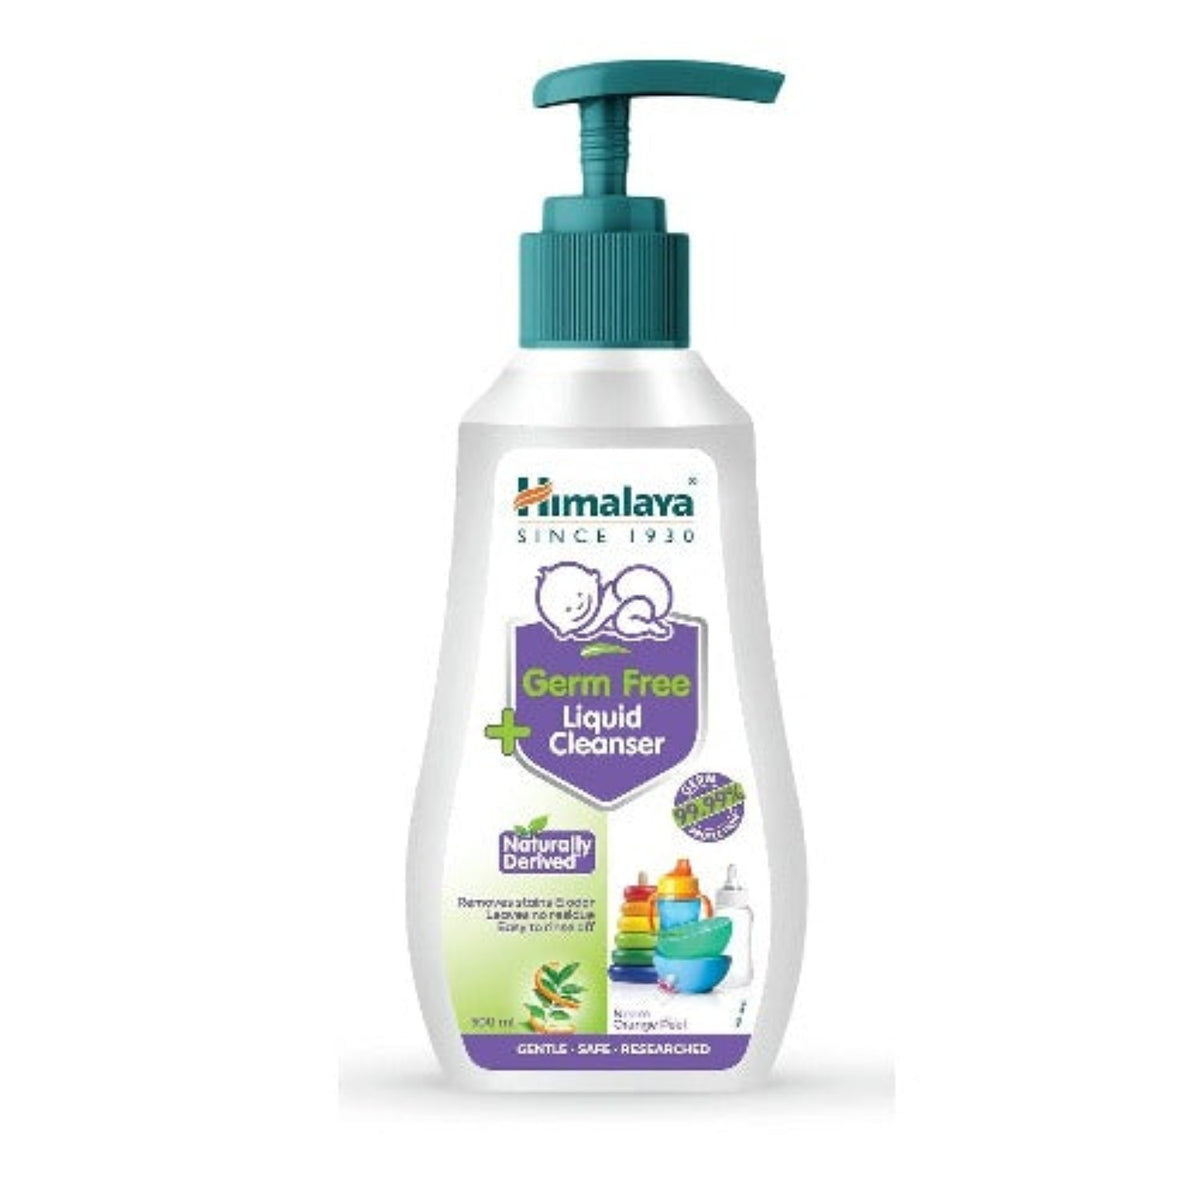 Himalaya Herbal Ayurvedic Germ Free Liquid Cleanser Baby Care Cleanses,Removes Germs,Stains,And Odor Effectively From Baby’s Feeding Accessories And Toys Liquid 500 ml